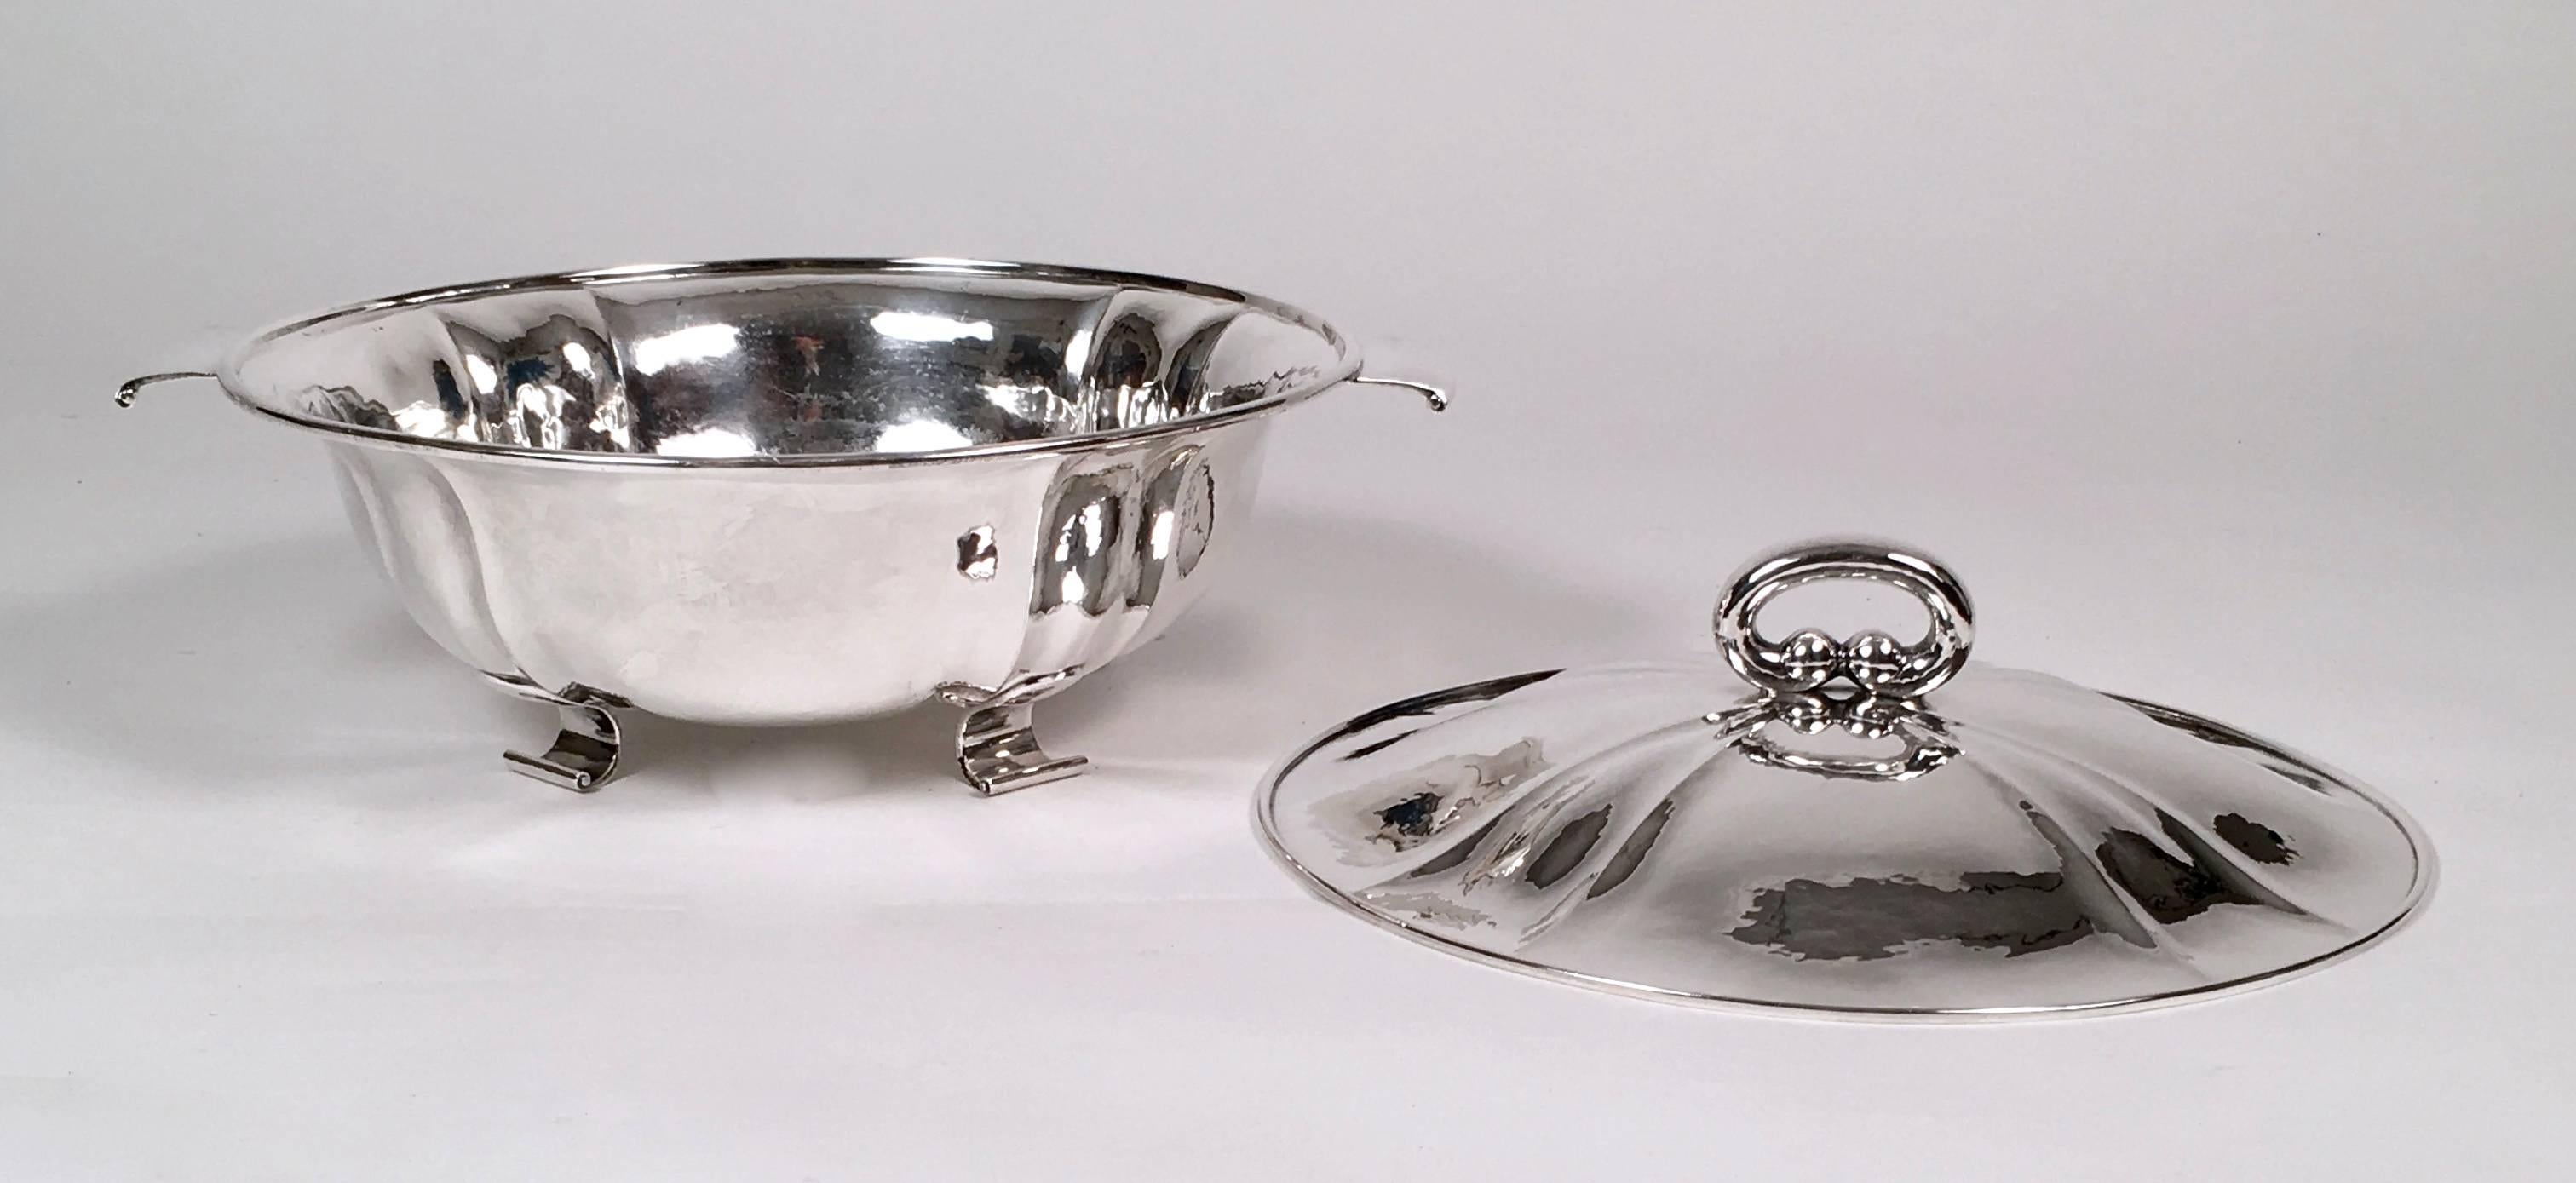 A very fine quality handmade Swiss sterling silver covered tureen, of circular form, with hand-hammered cover and base, both of which have decorative ribbing, with oval loop handle on the cover and flattened scrolled strap handles and feet. Signed